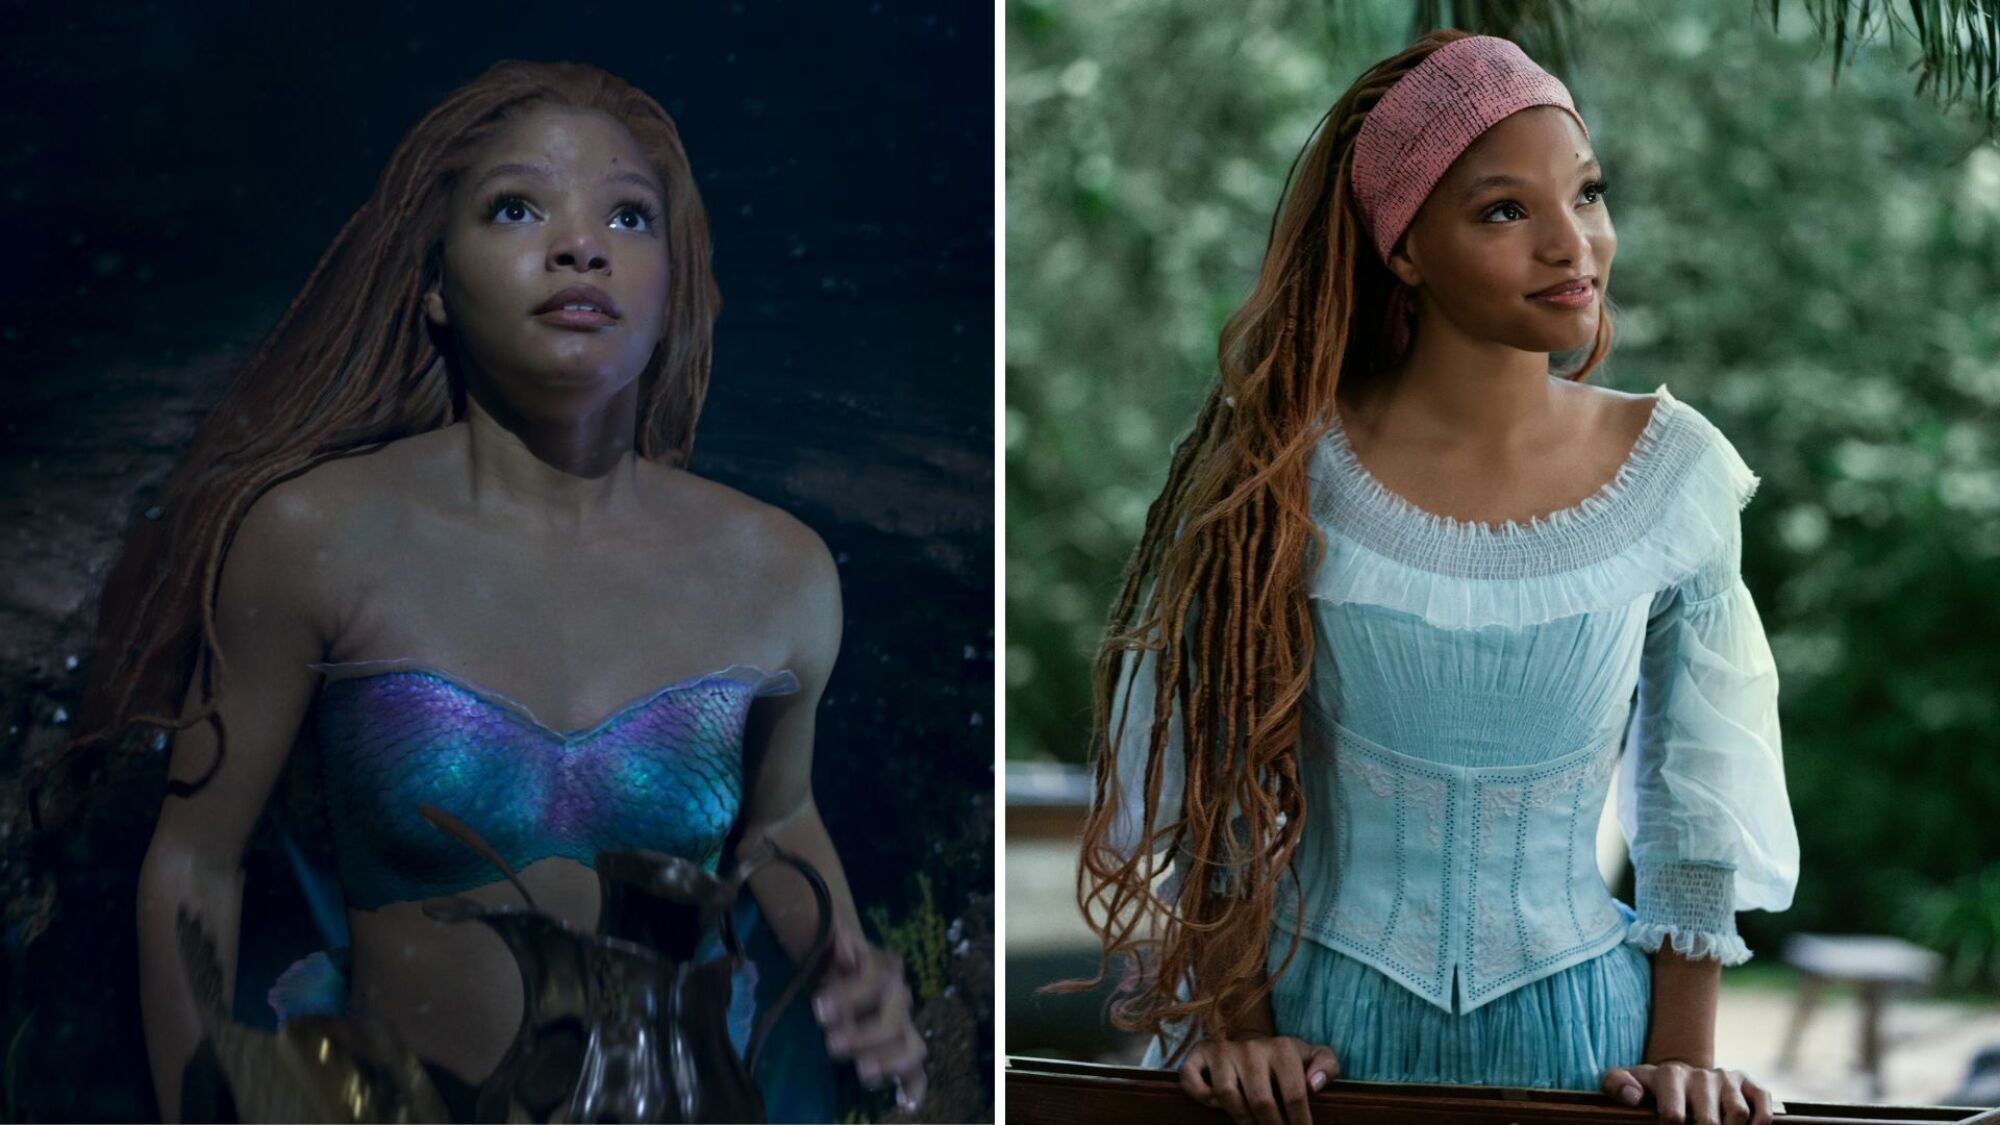 Two images of Halle Bailey as Ariel in "The Little Mermaid" — one as a mermaid, and one in a light blue gown in the human world.